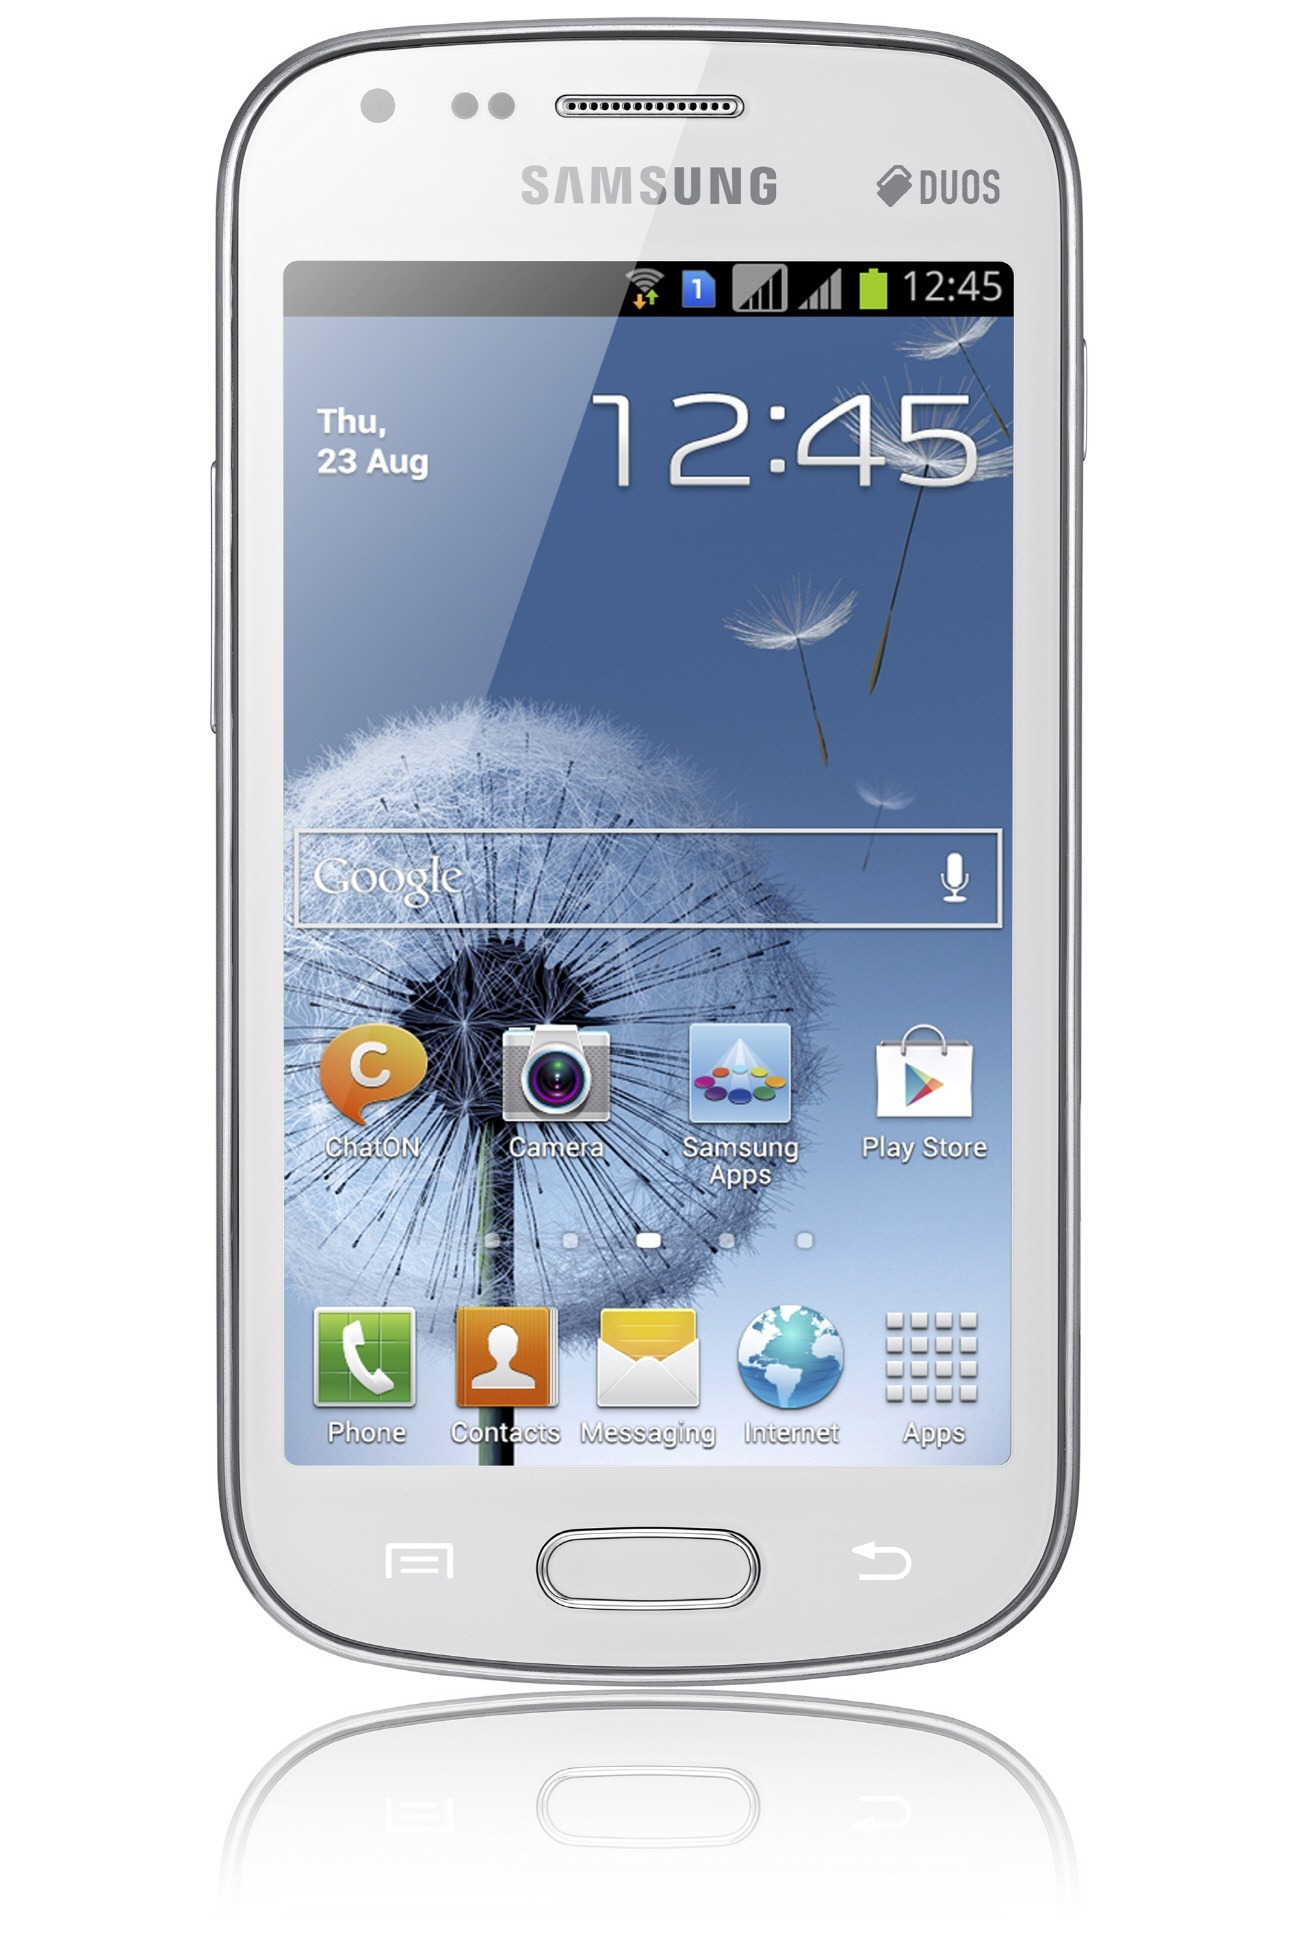 Samsung GALAXY S Duos Full Specifications And Price Details - Gadgetian